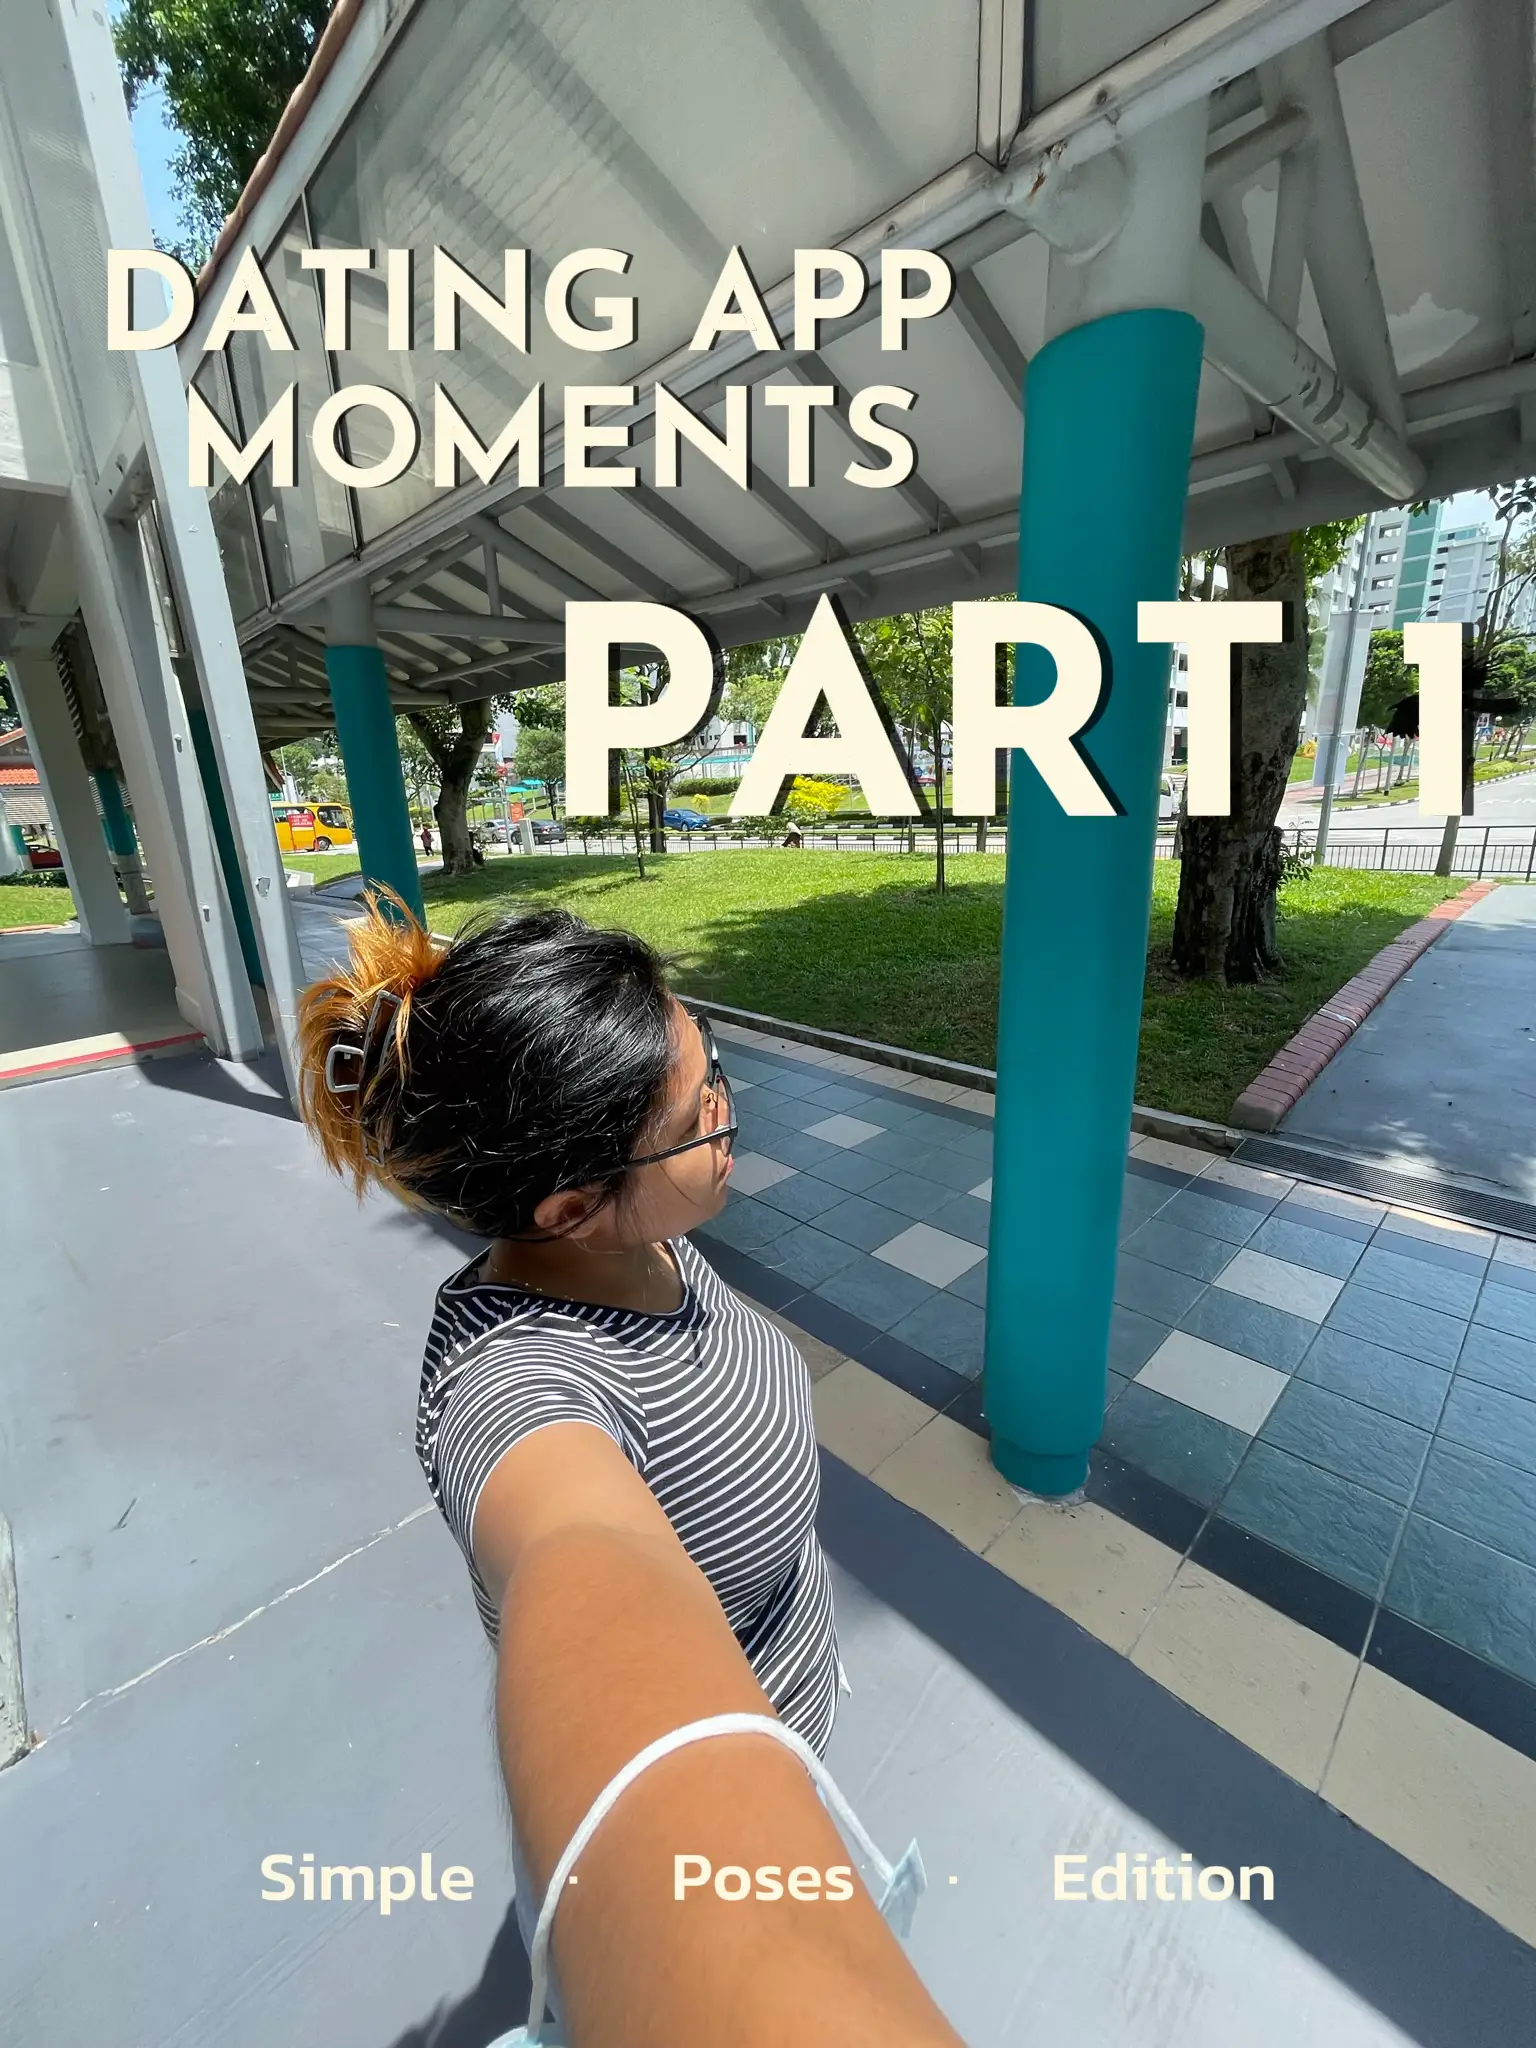 dating apps moment series ep 1's images